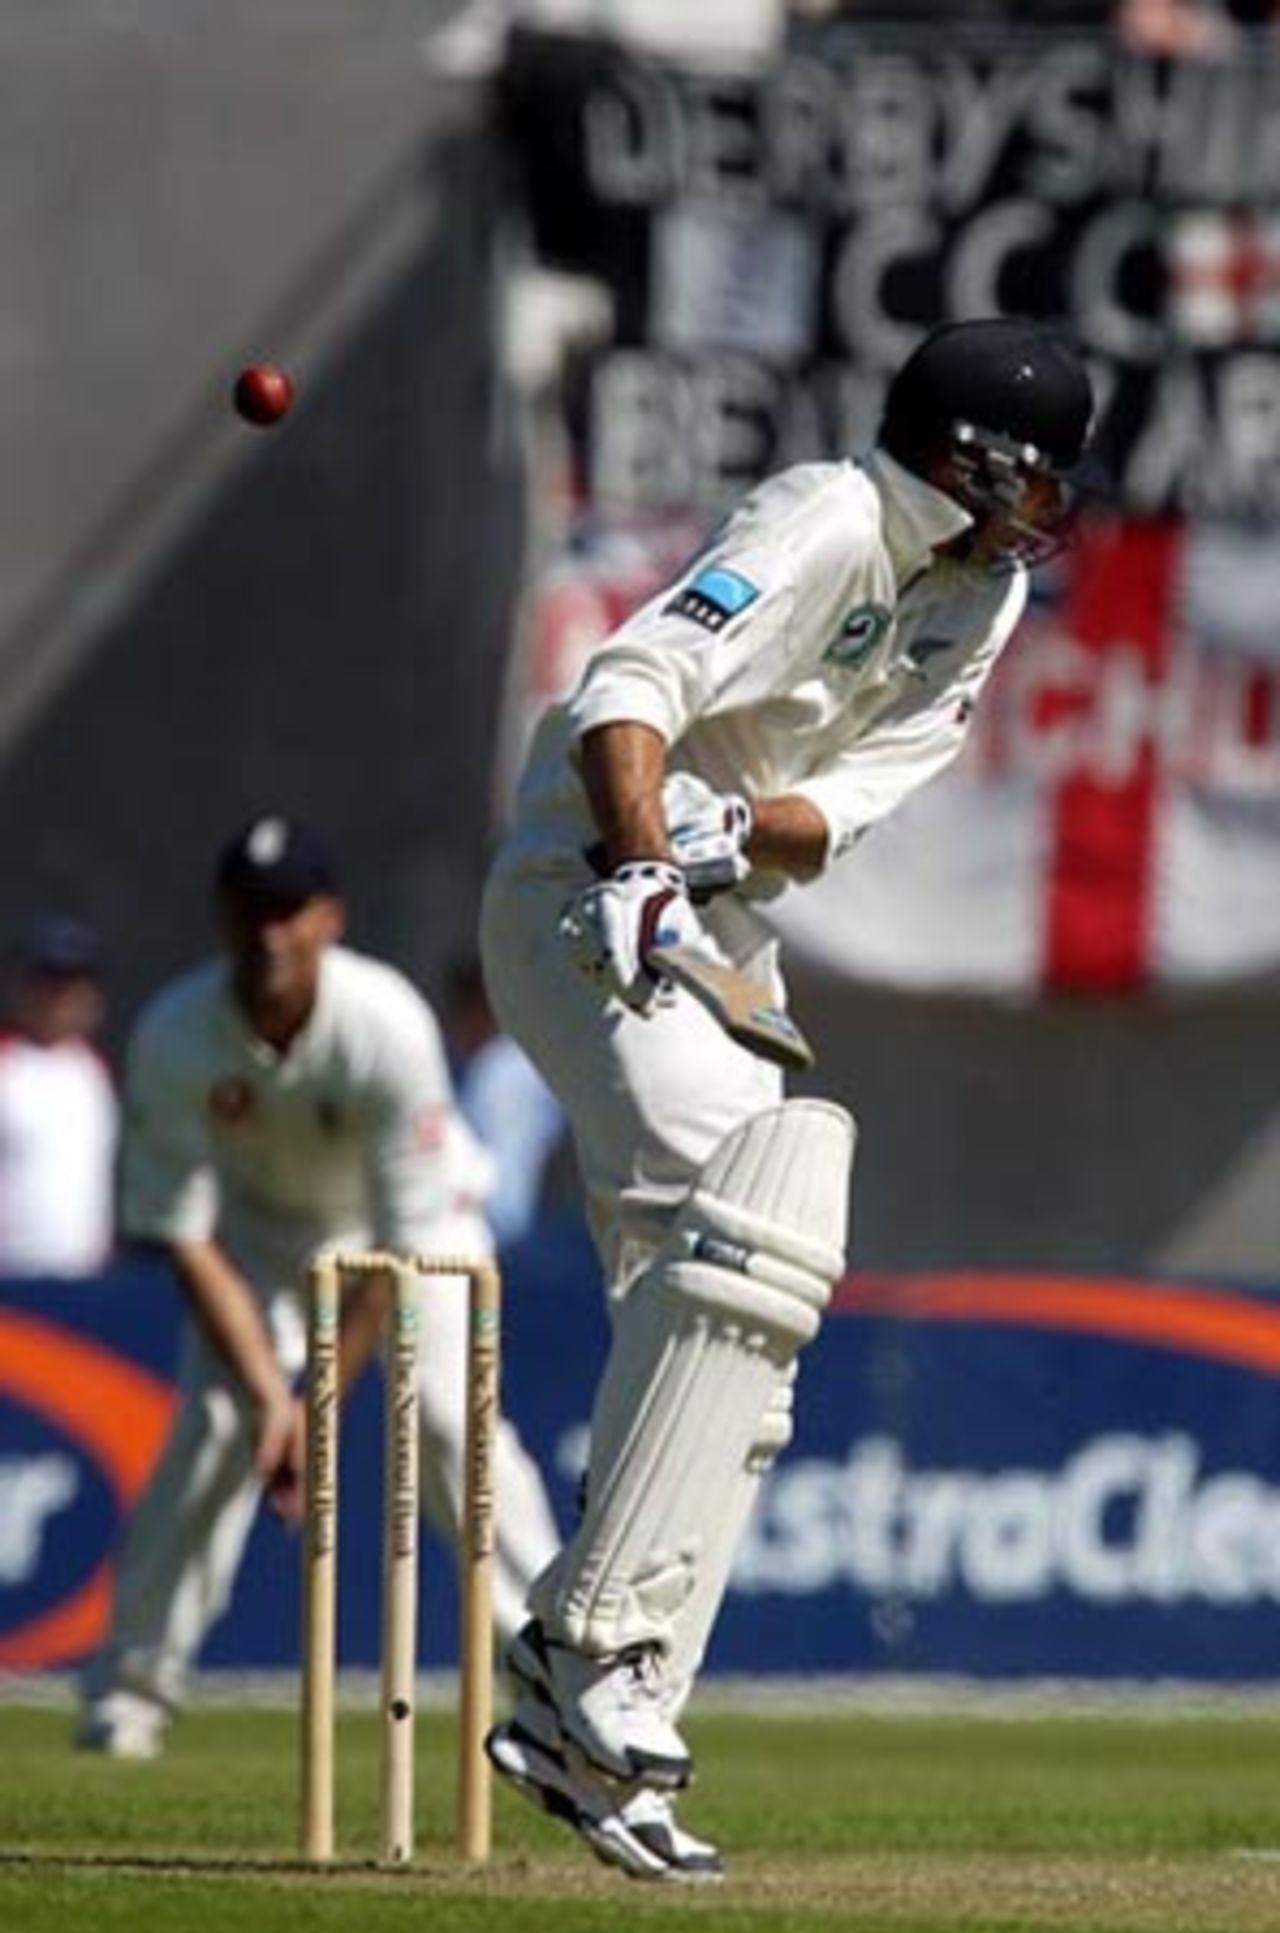 New Zealand batsman Stephen Fleming is struck on the body by a short delivery from England bowler Andrew Flintoff during his first innings of 12. 1st Test: New Zealand v England at Jade Stadium, Christchurch, 13-17 March 2002 (14 March 2002).